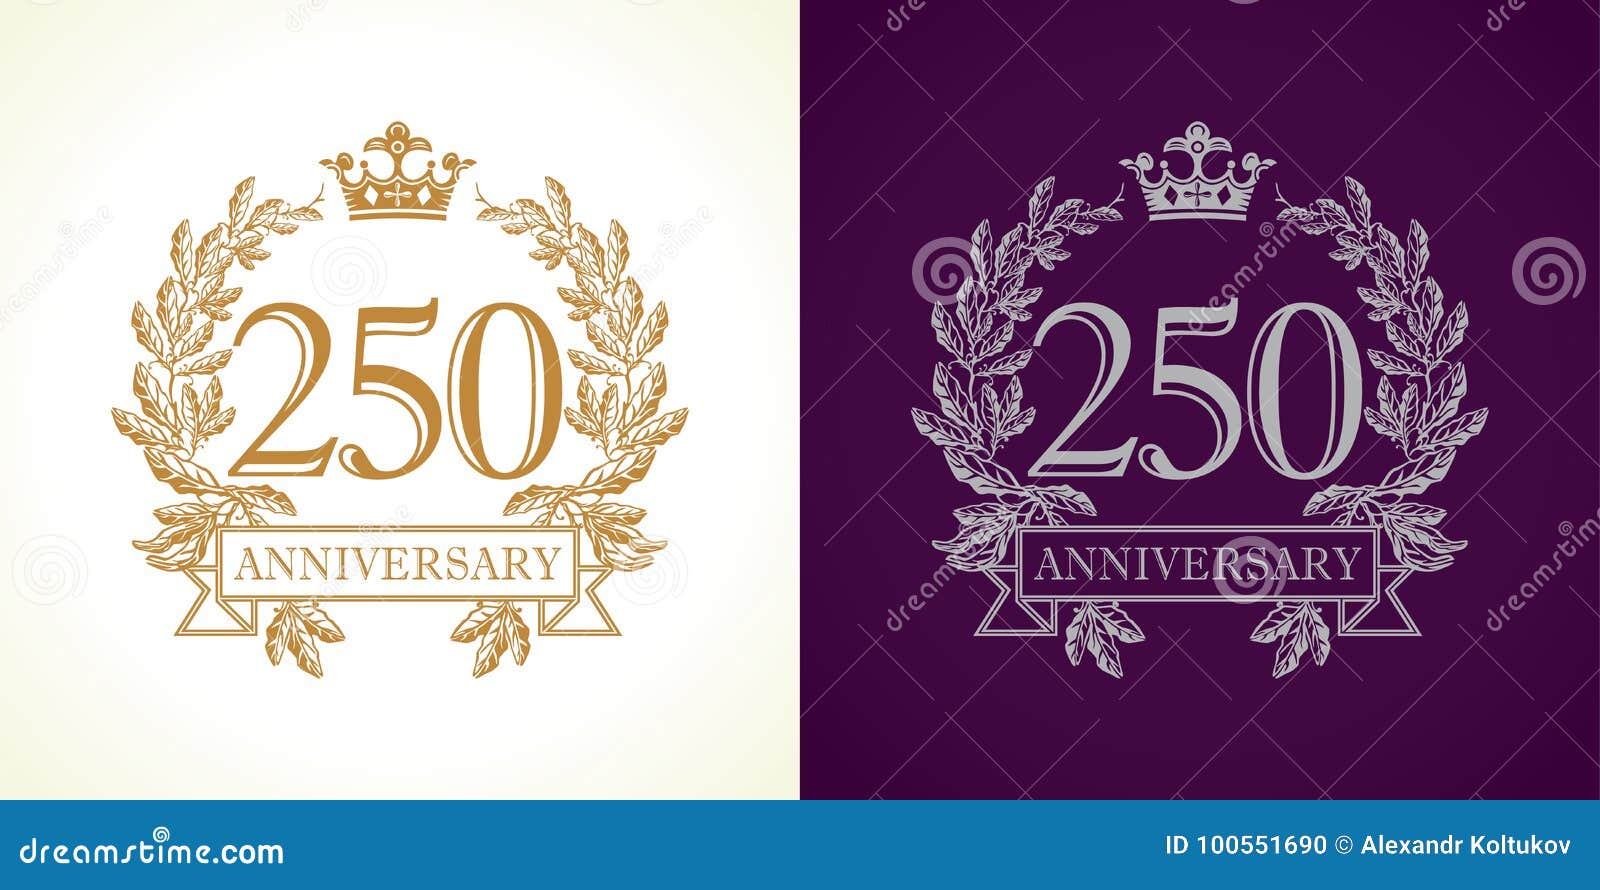 Walmart's 250th Anniversary: Free $250 Coupon - wide 7